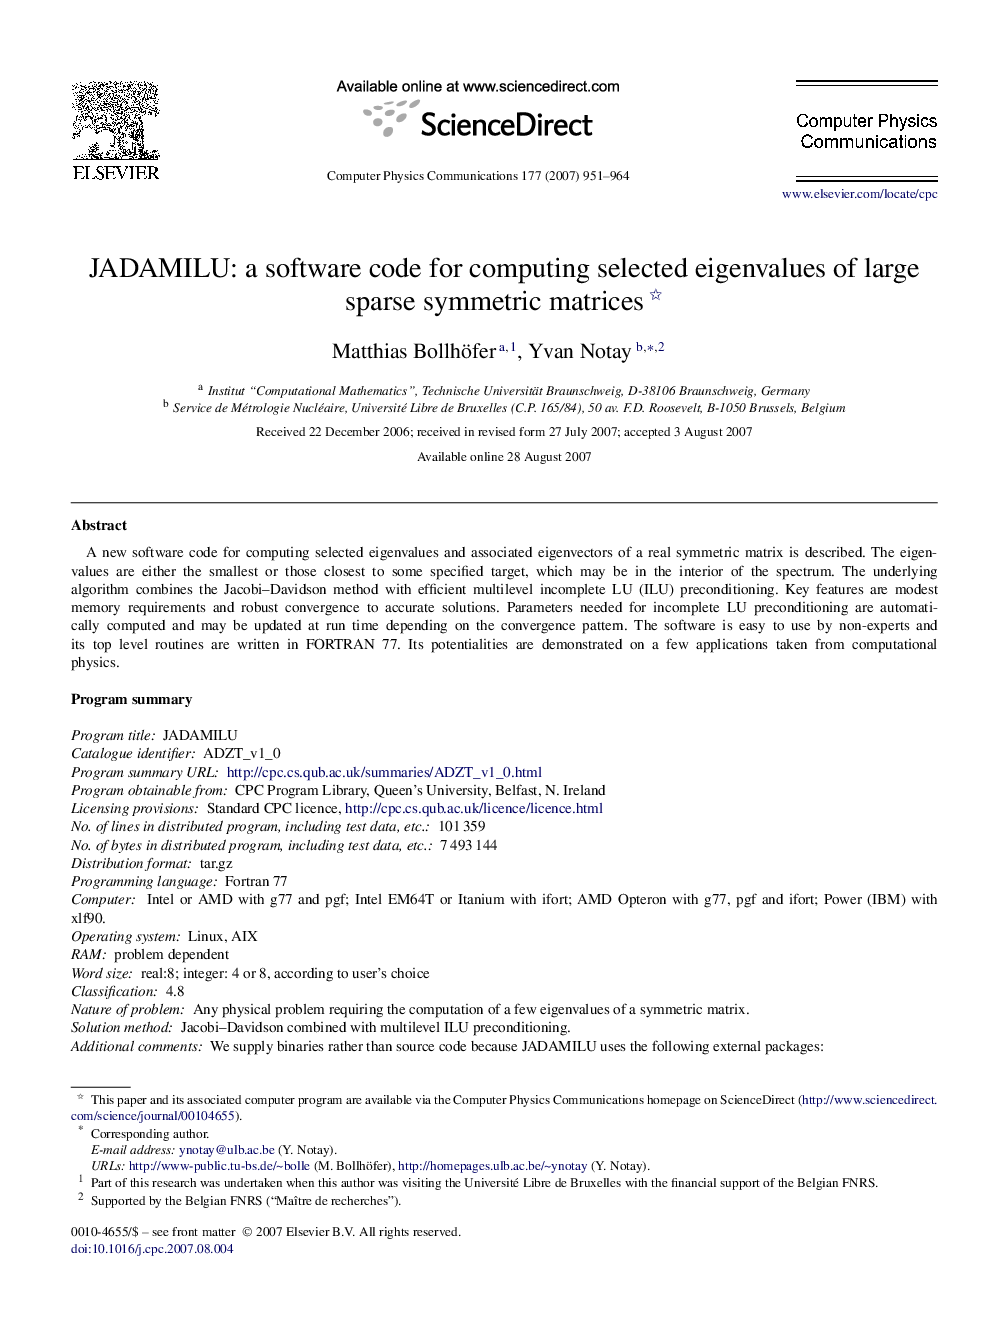 JADAMILU: a software code for computing selected eigenvalues of large sparse symmetric matrices 